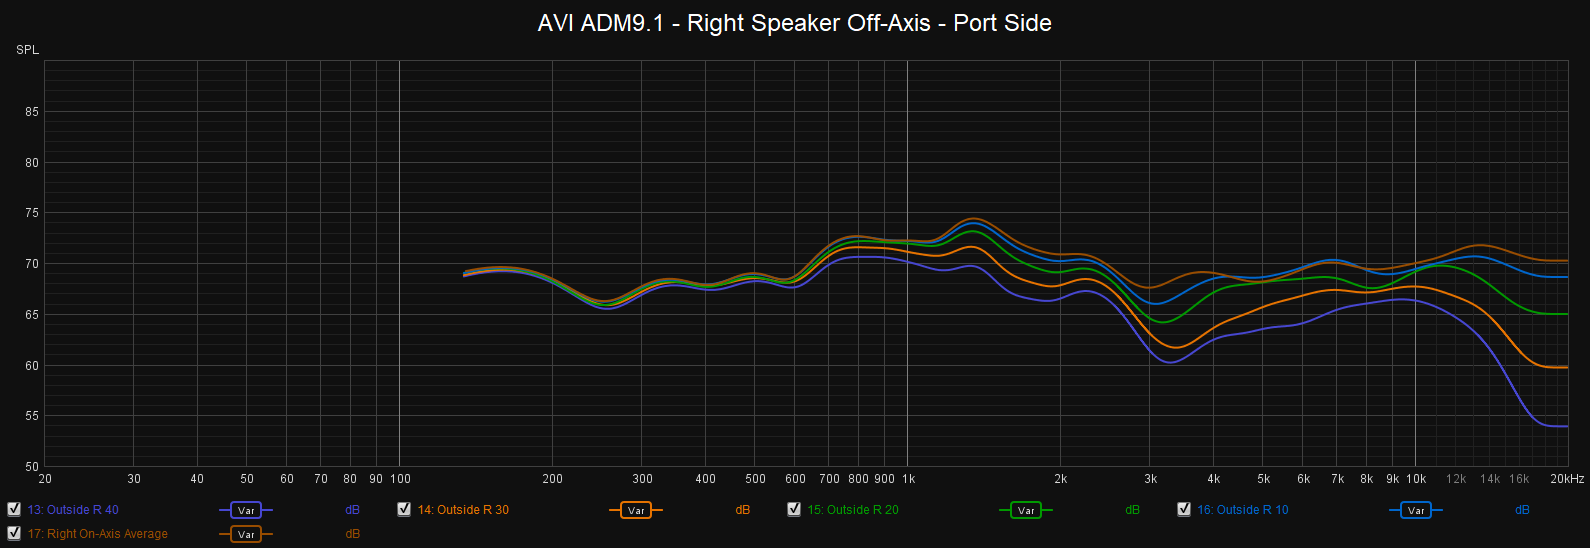 AVI ADM9.1 - Right Speaker Off Axis - Port Side.png